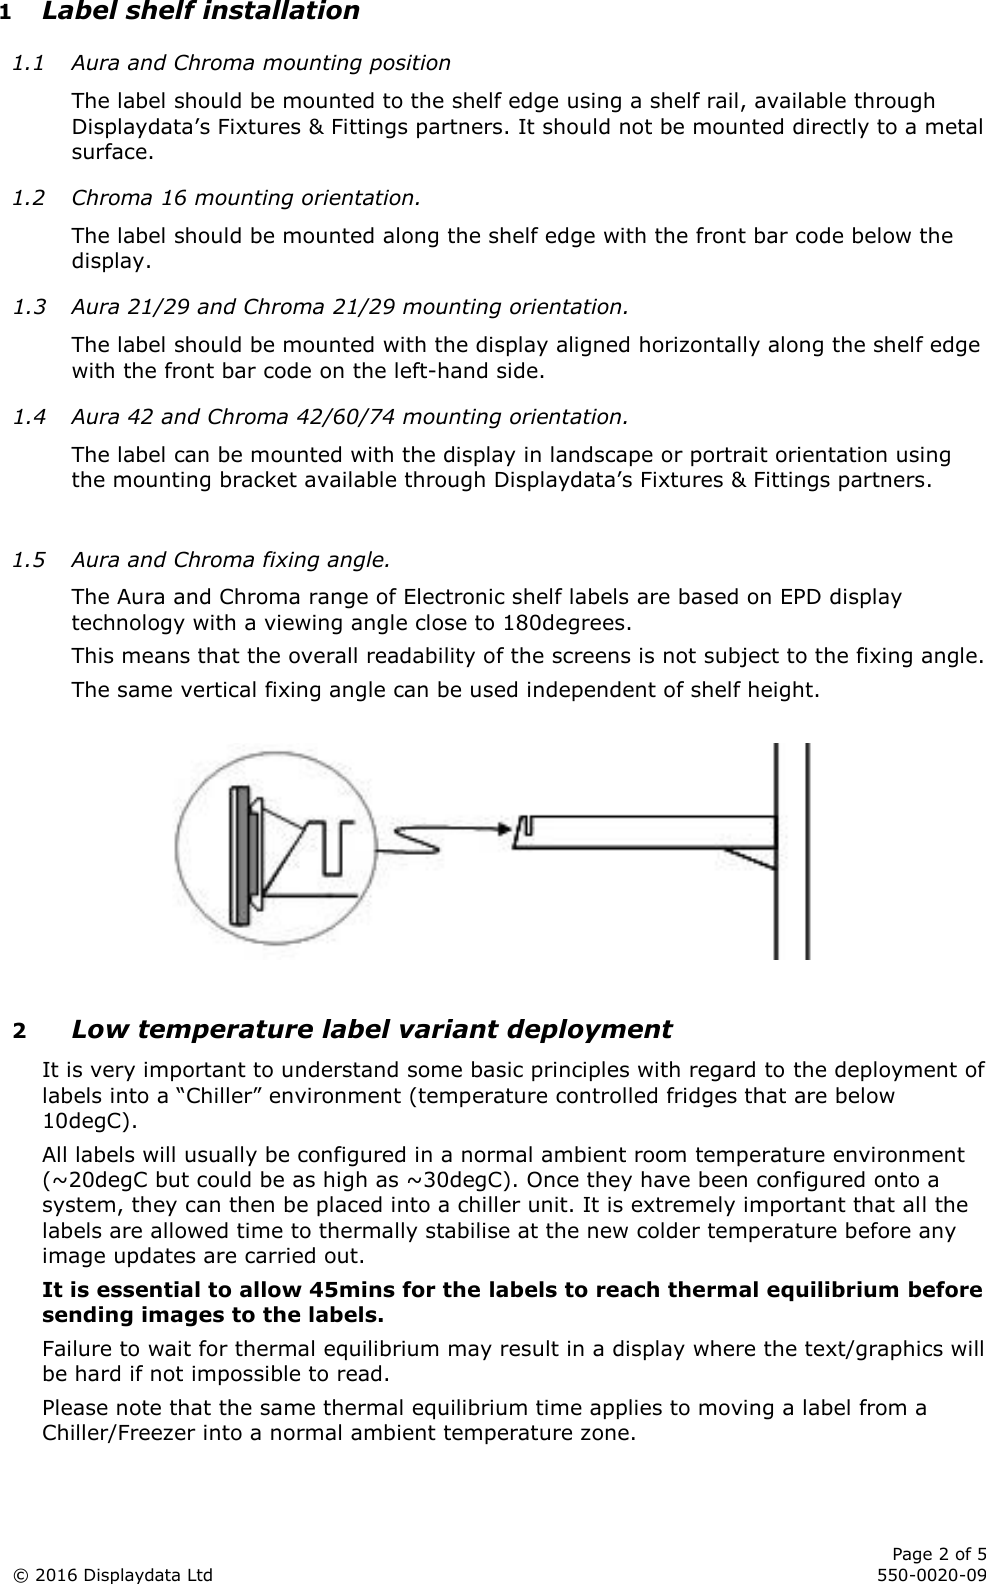      Page 2 of 5 © 2016 Displaydata Ltd     550-0020-09 1 Label shelf installation 1.1 Aura and Chroma mounting position The label should be mounted to the shelf edge using a shelf rail, available through Displaydata’s Fixtures &amp; Fittings partners. It should not be mounted directly to a metal surface. 1.2 Chroma 16 mounting orientation. The label should be mounted along the shelf edge with the front bar code below the display. 1.3 Aura 21/29 and Chroma 21/29 mounting orientation. The label should be mounted with the display aligned horizontally along the shelf edge with the front bar code on the left-hand side. 1.4 Aura 42 and Chroma 42/60/74 mounting orientation. The label can be mounted with the display in landscape or portrait orientation using the mounting bracket available through Displaydata’s Fixtures &amp; Fittings partners.  1.5 Aura and Chroma fixing angle. The Aura and Chroma range of Electronic shelf labels are based on EPD display technology with a viewing angle close to 180degrees. This means that the overall readability of the screens is not subject to the fixing angle. The same vertical fixing angle can be used independent of shelf height.    2 Low temperature label variant deployment It is very important to understand some basic principles with regard to the deployment of labels into a “Chiller” environment (temperature controlled fridges that are below 10degC). All labels will usually be configured in a normal ambient room temperature environment (~20degC but could be as high as ~30degC). Once they have been configured onto a system, they can then be placed into a chiller unit. It is extremely important that all the labels are allowed time to thermally stabilise at the new colder temperature before any image updates are carried out. It is essential to allow 45mins for the labels to reach thermal equilibrium before sending images to the labels. Failure to wait for thermal equilibrium may result in a display where the text/graphics will be hard if not impossible to read. Please note that the same thermal equilibrium time applies to moving a label from a Chiller/Freezer into a normal ambient temperature zone. 